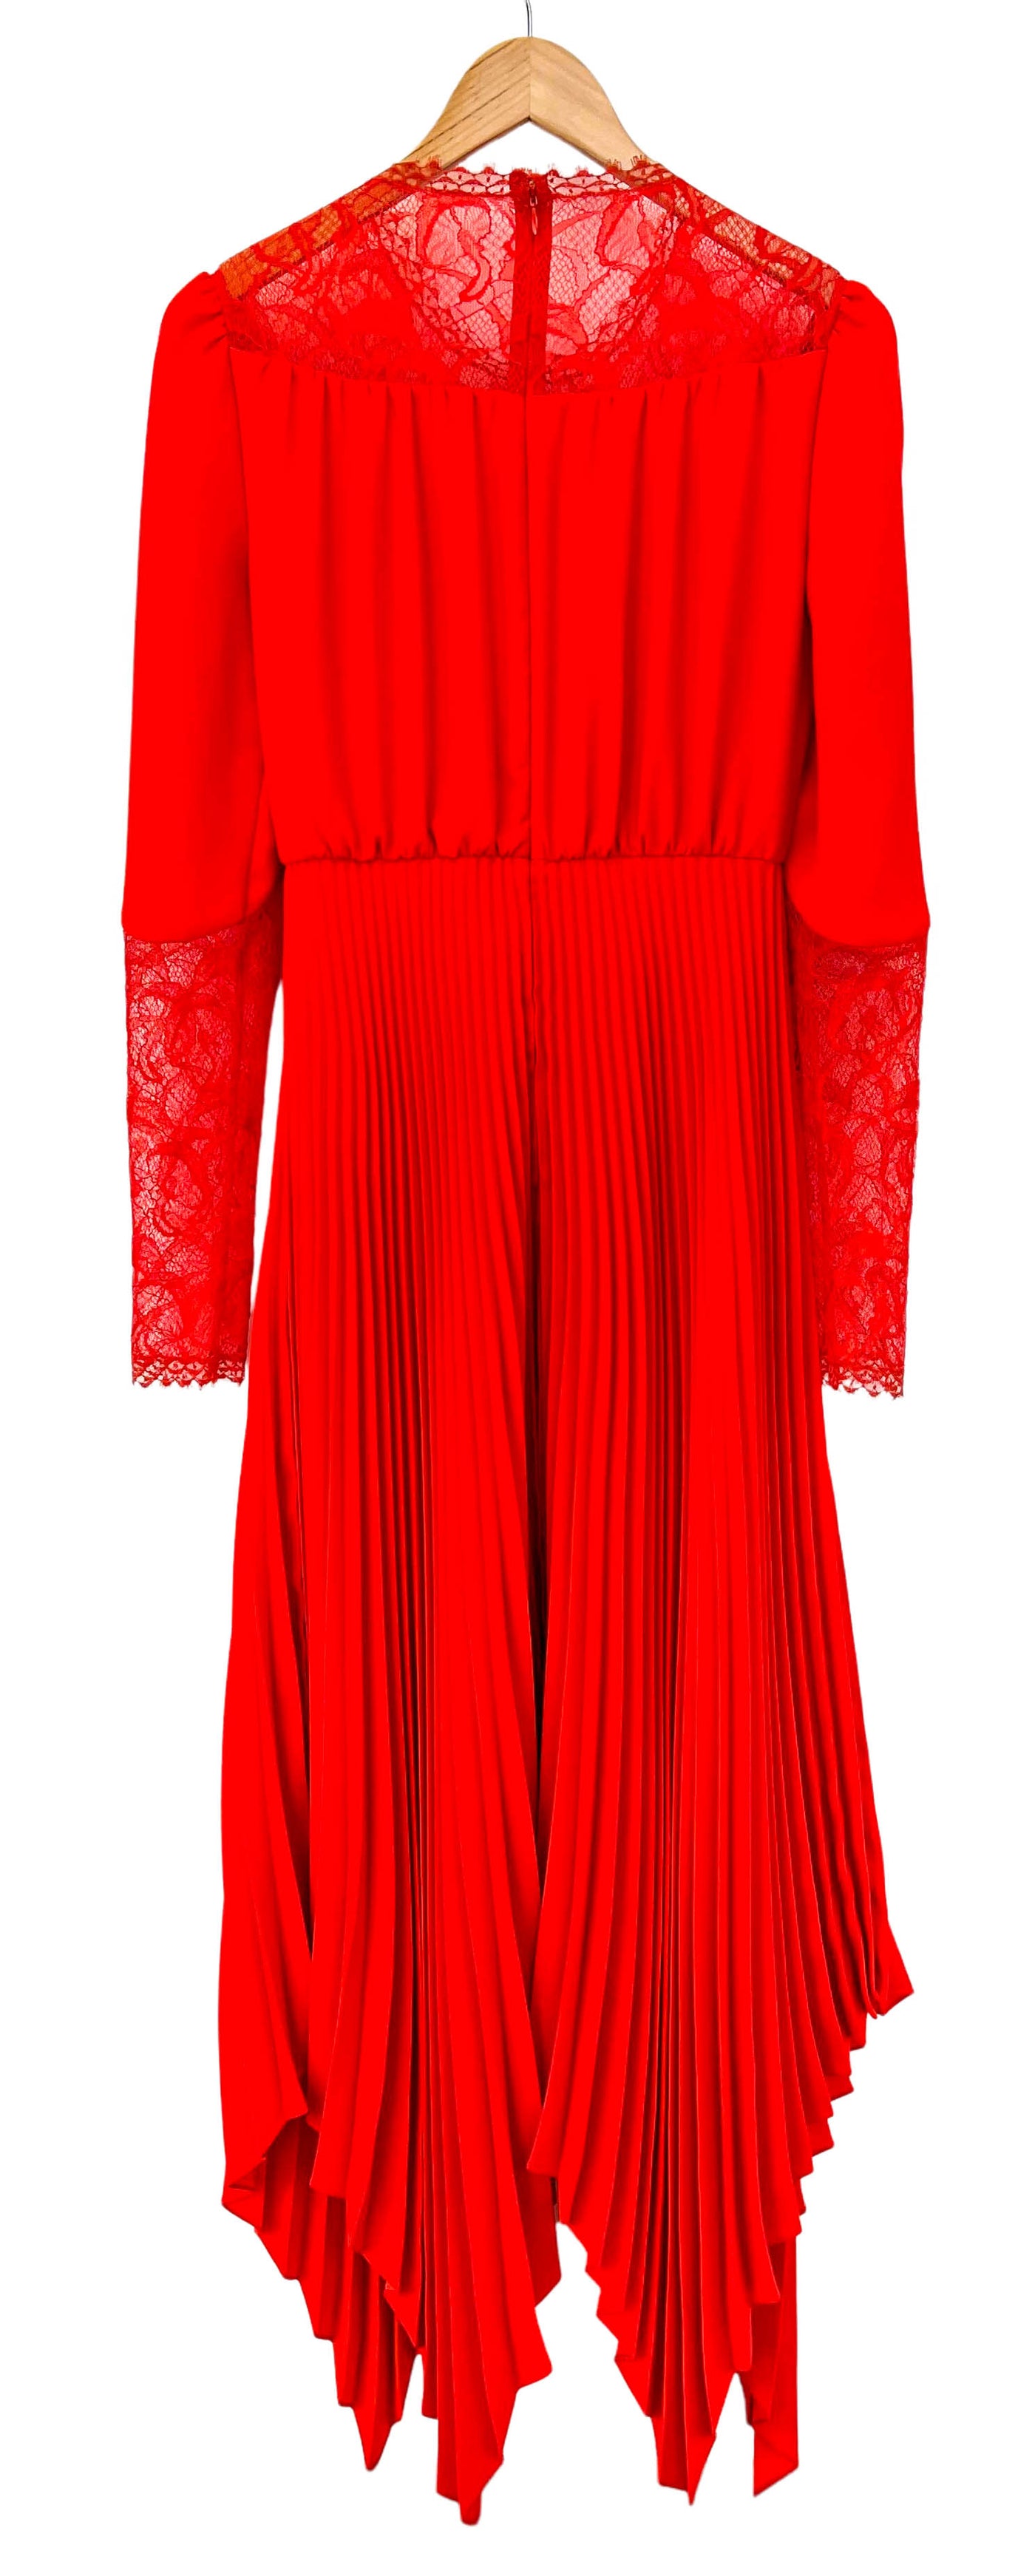 DEL CORE Long Sleeve Dress with Pleat and Lace Detail in Red - Discounts on DEL CORE at UAL